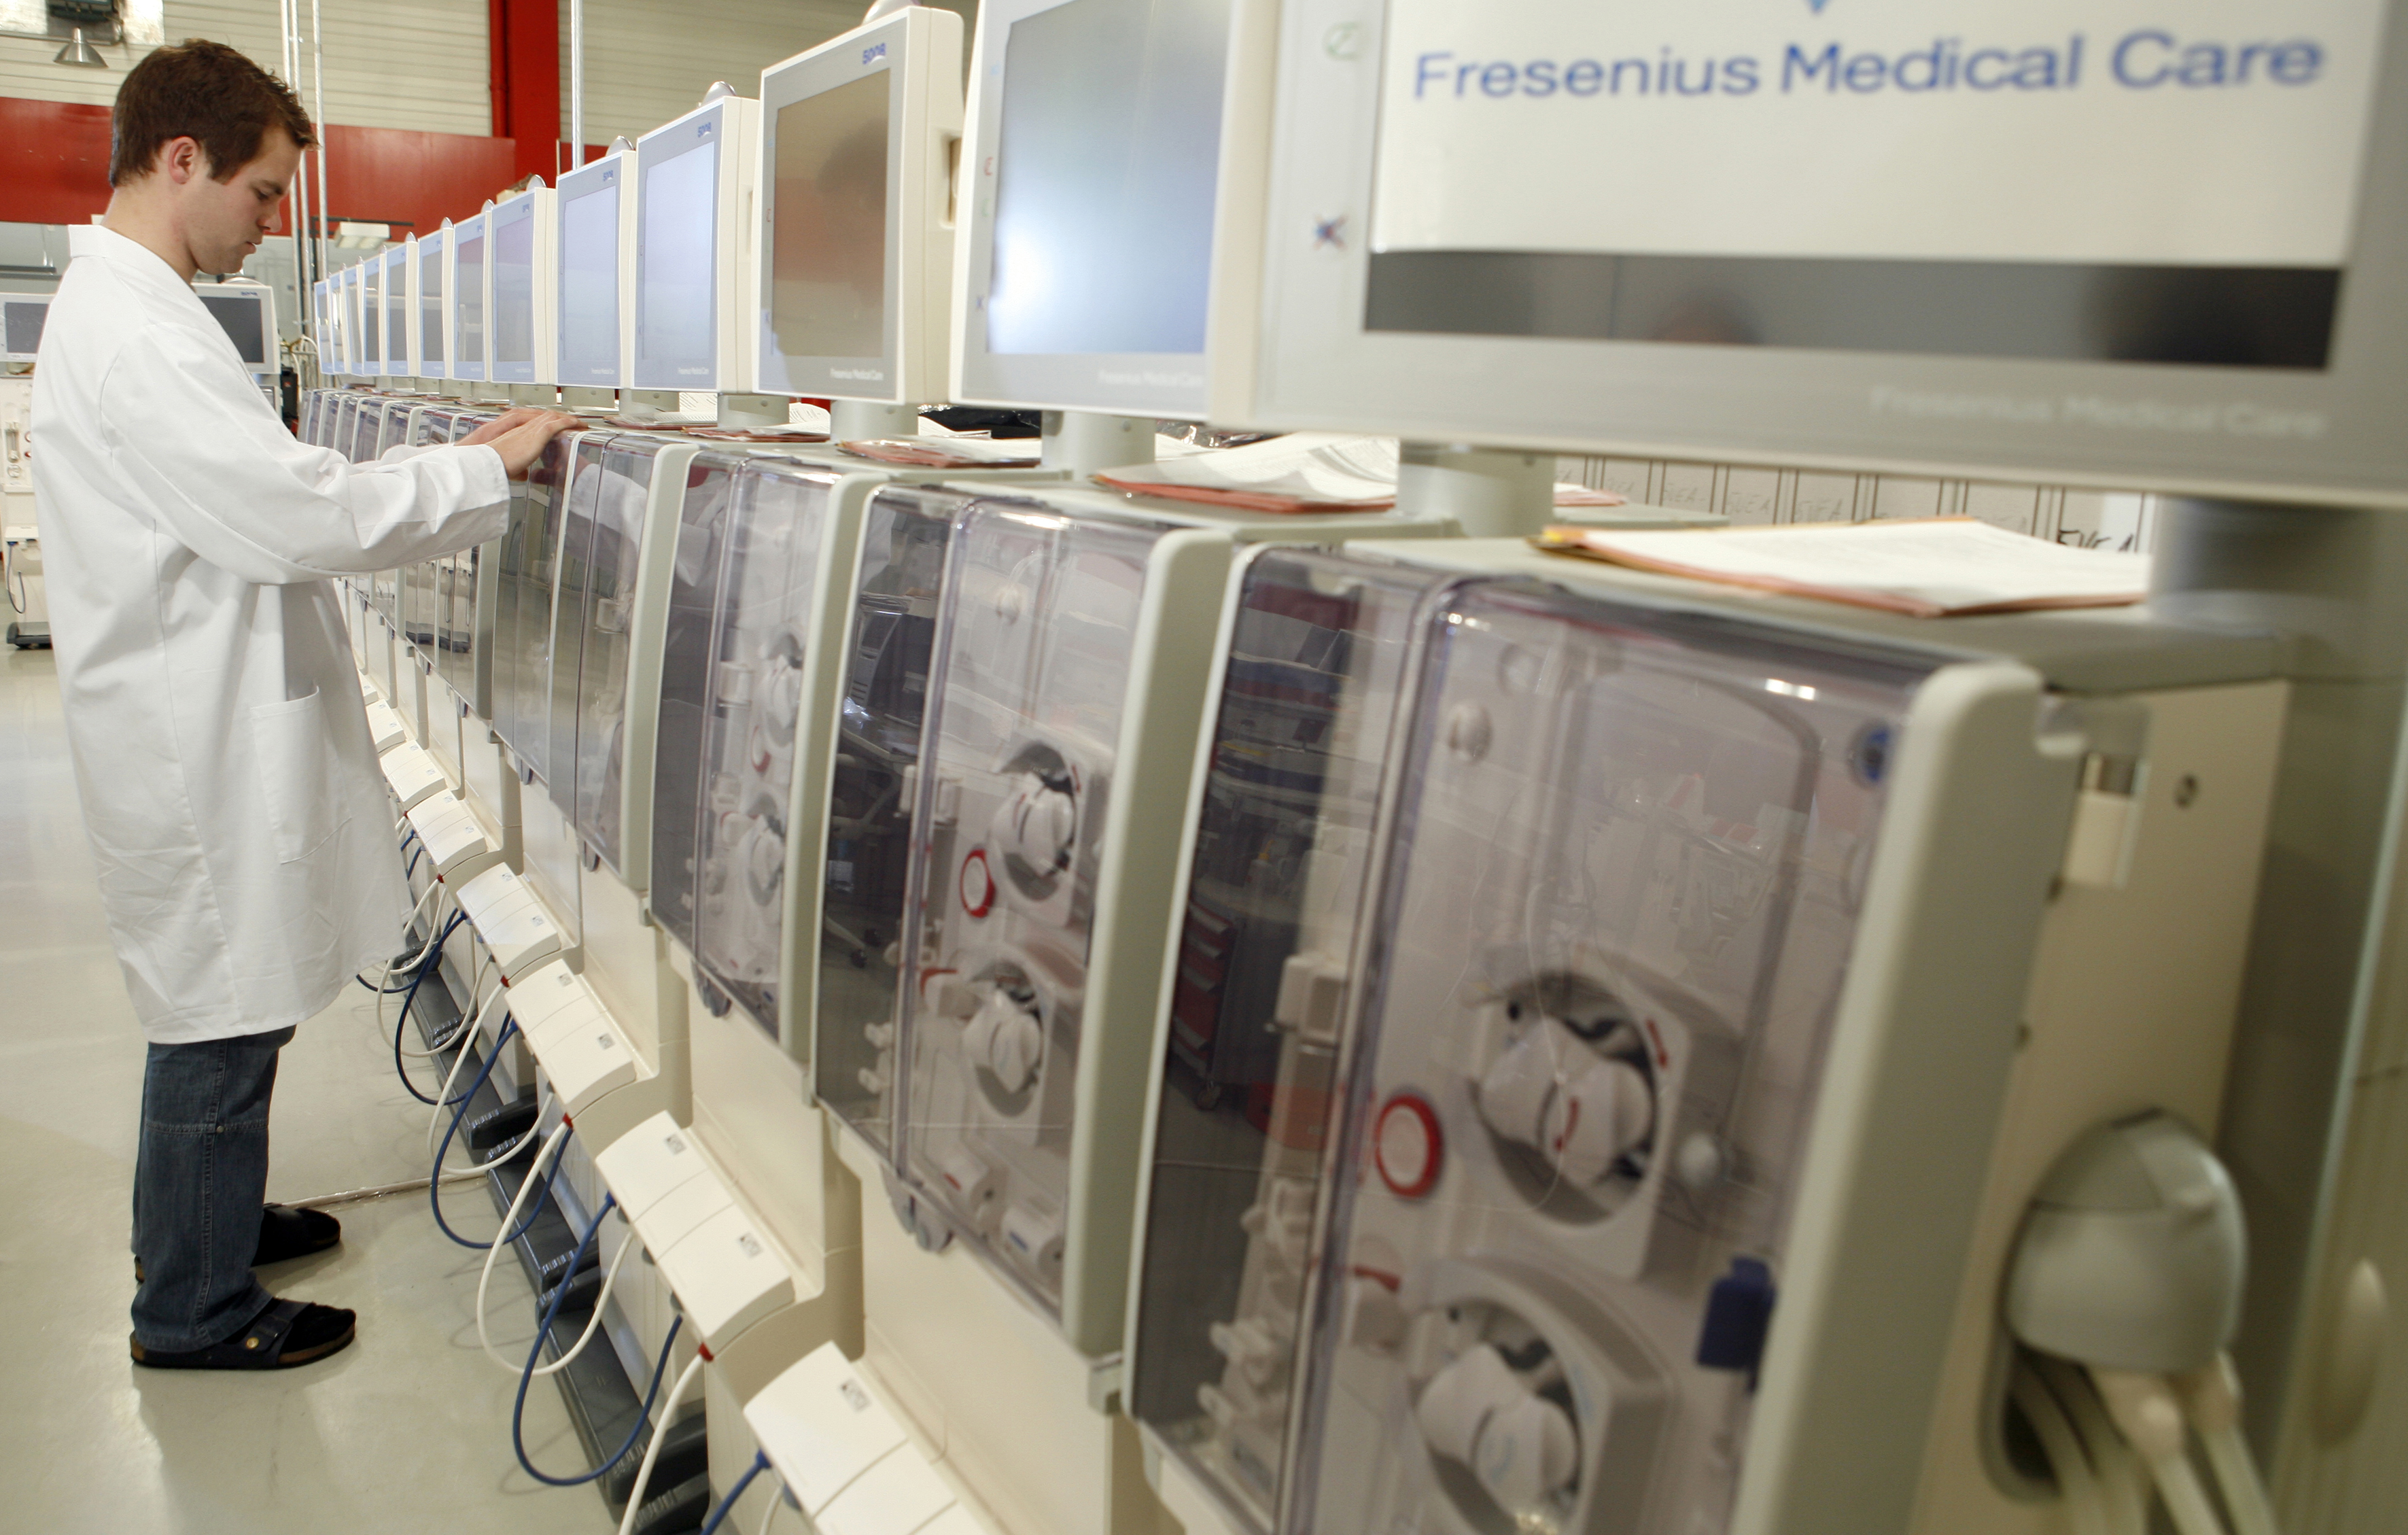 What are some facts about Fresenius dialysis centers?